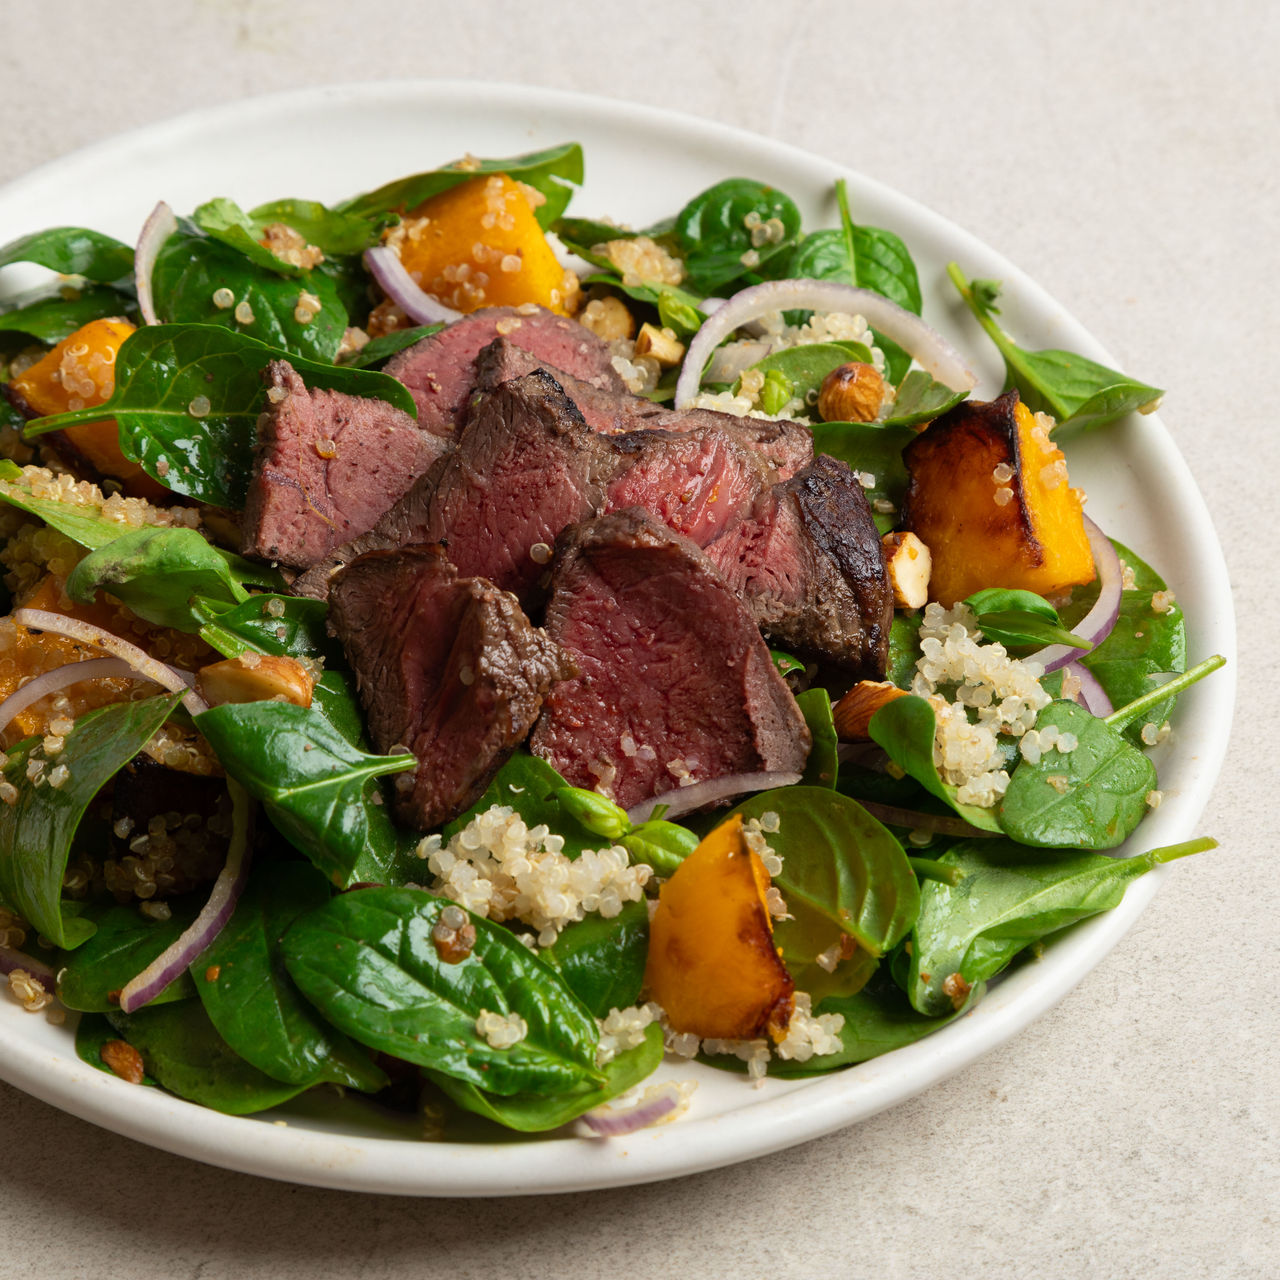 Seared Beef Medallions and Roast Pumpkin Salad with Harissa Dressing